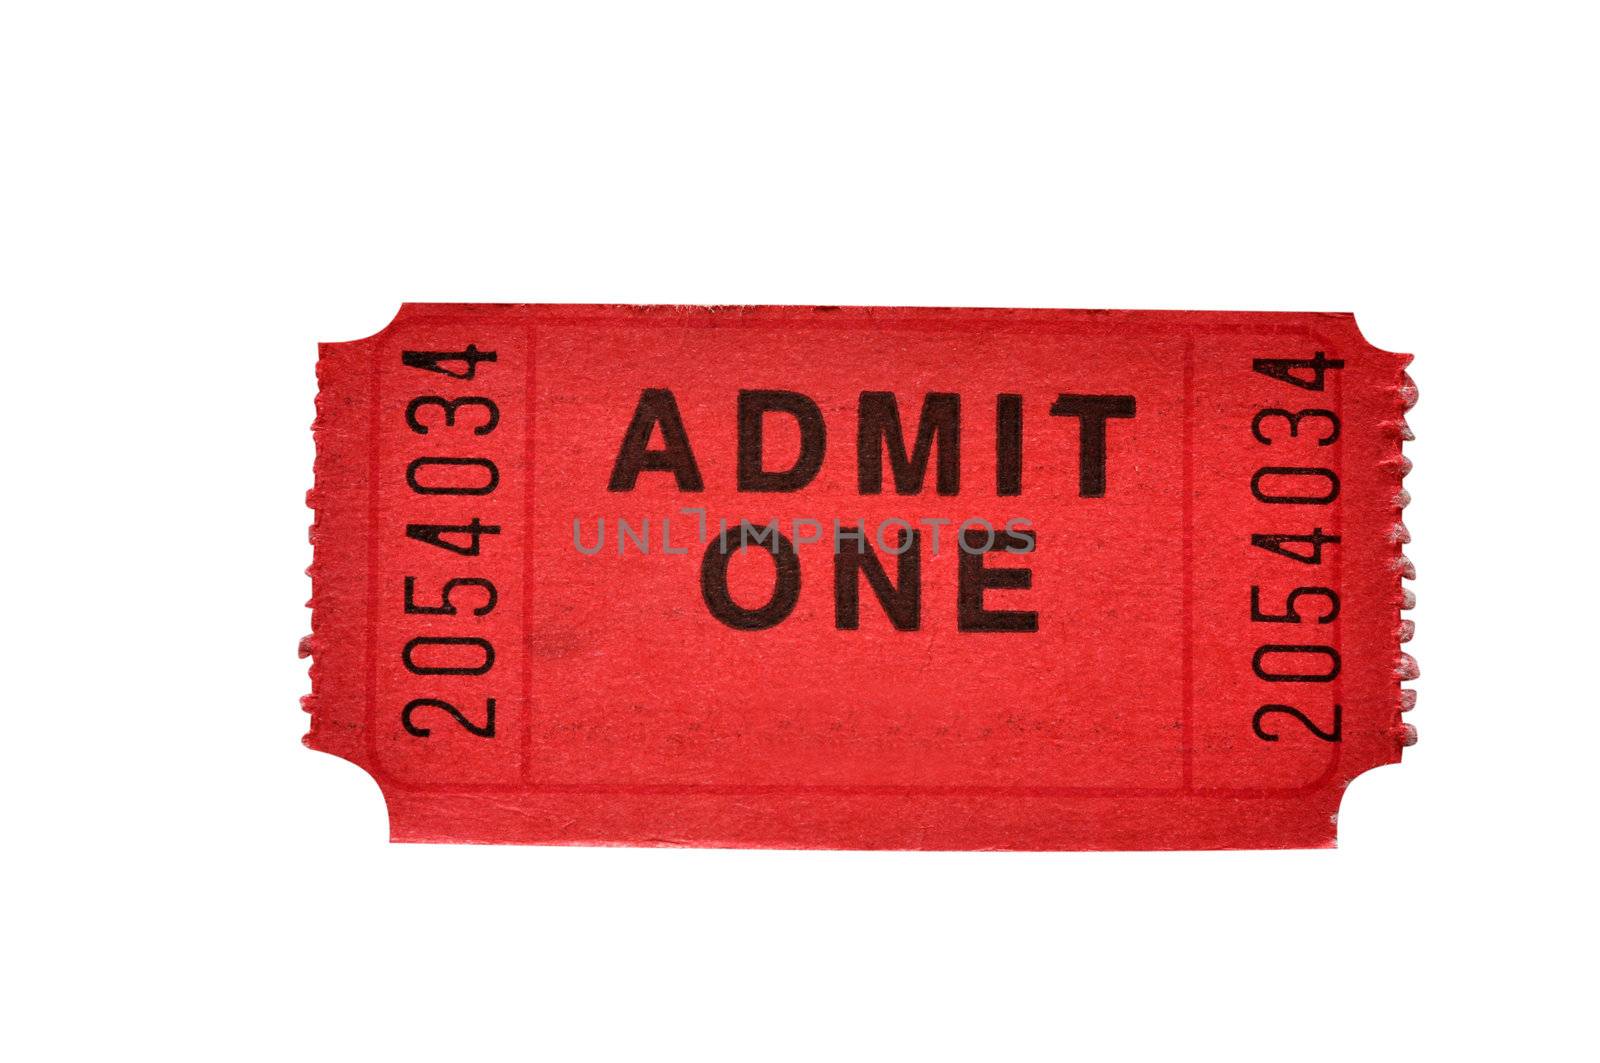 Admission ticket isolated on white background with clipping path.